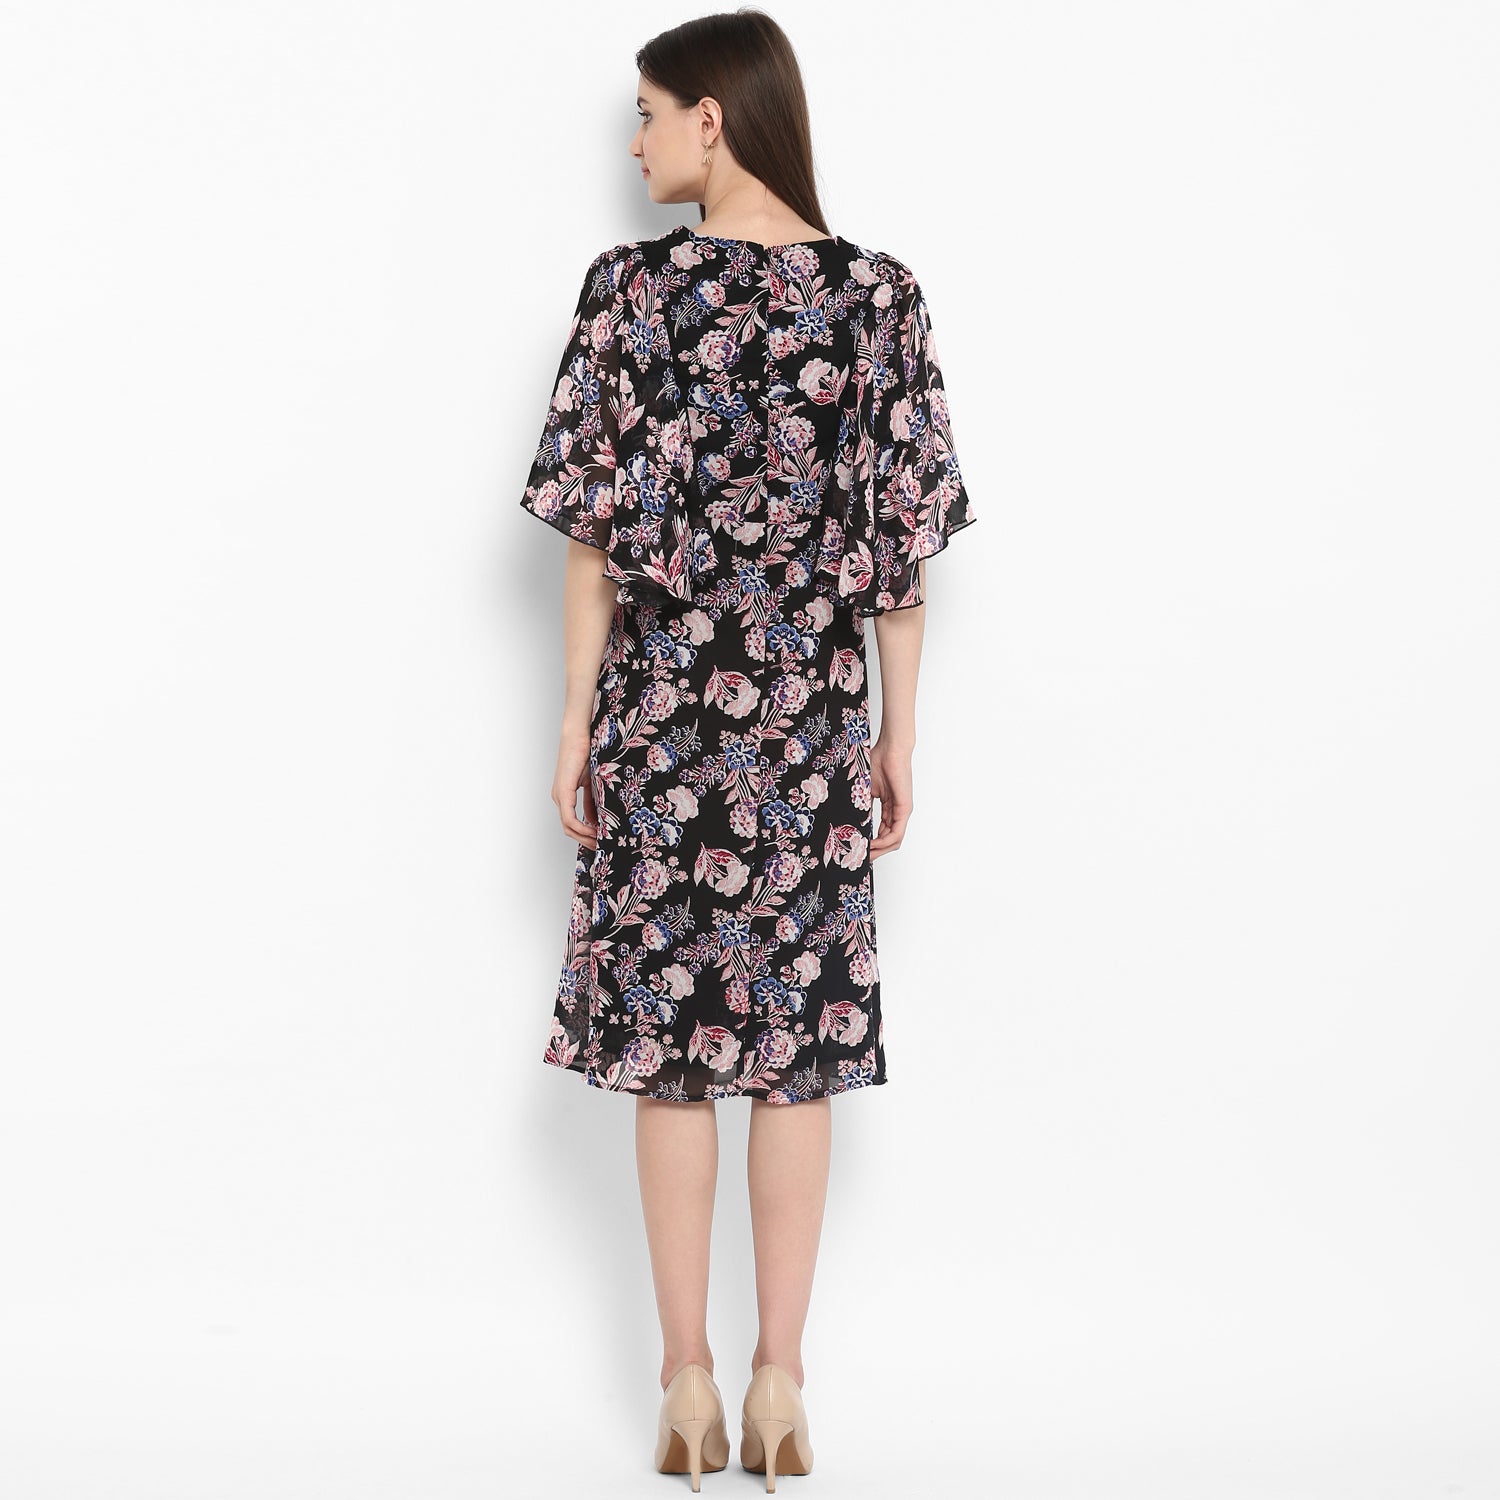 Women's Black Floral Dress with attached Shrug - StyleStone